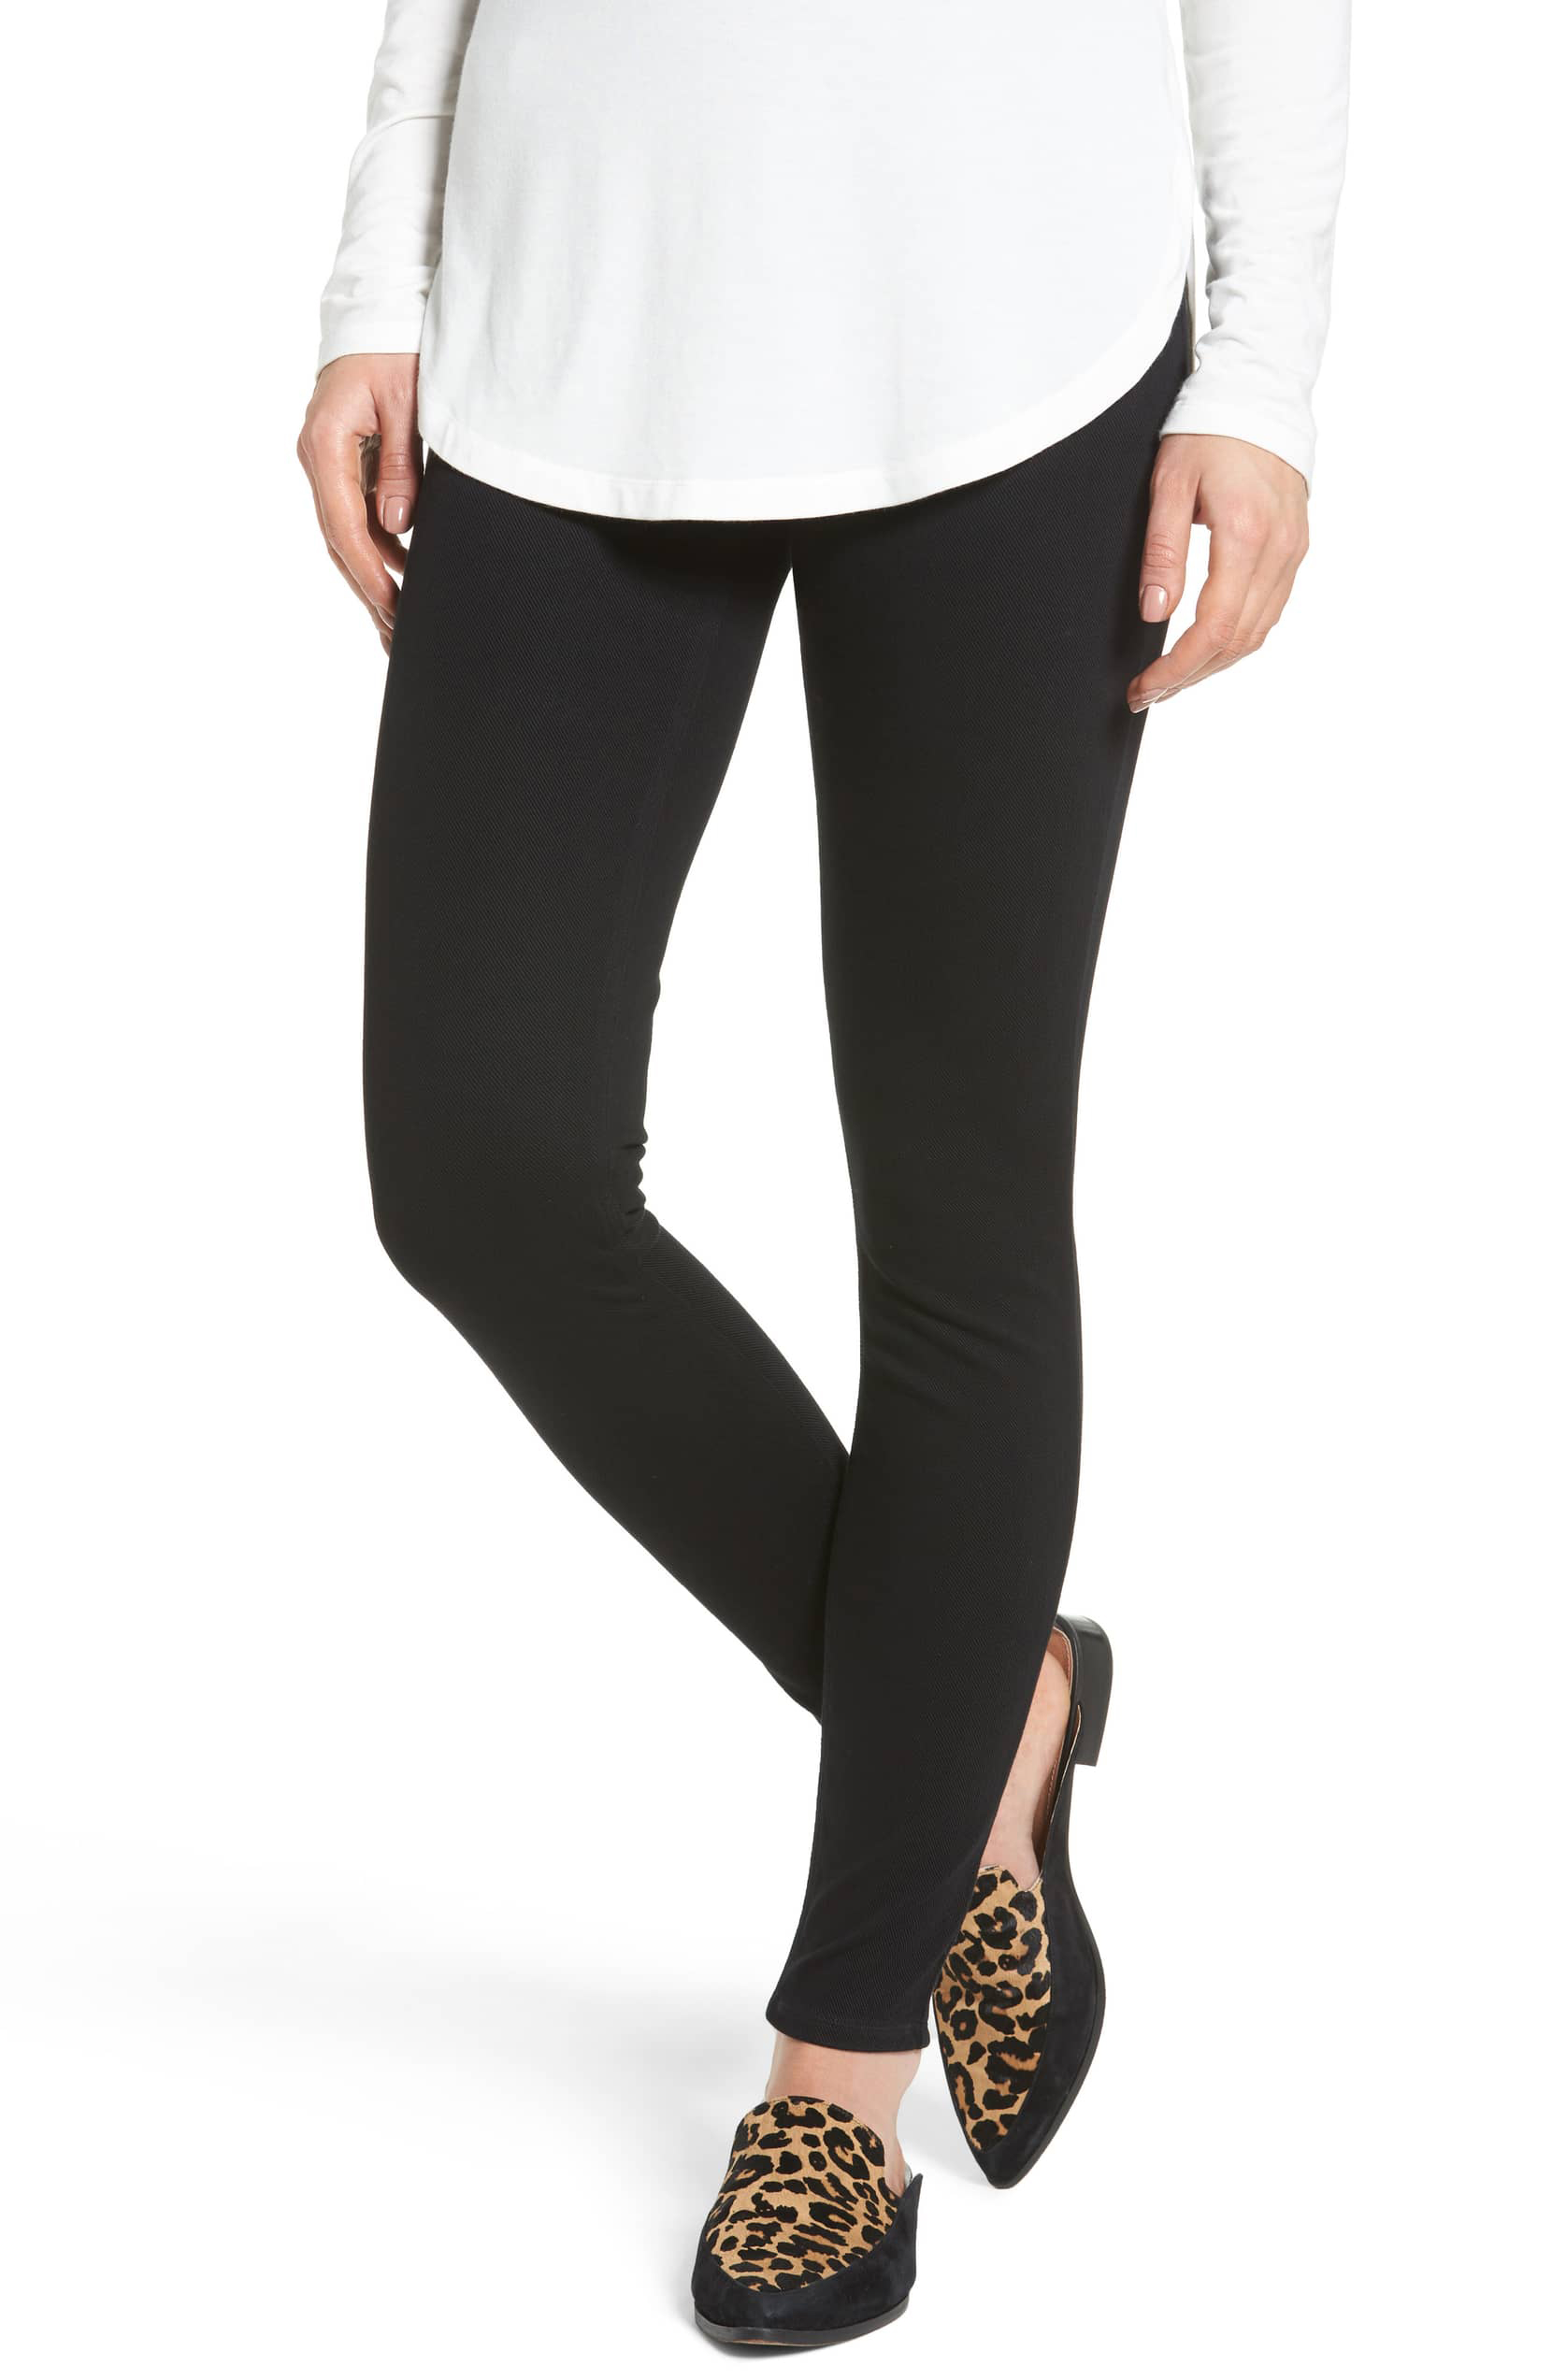 Shop The Spanx Leggings That Look Just Like Skinny Jeans